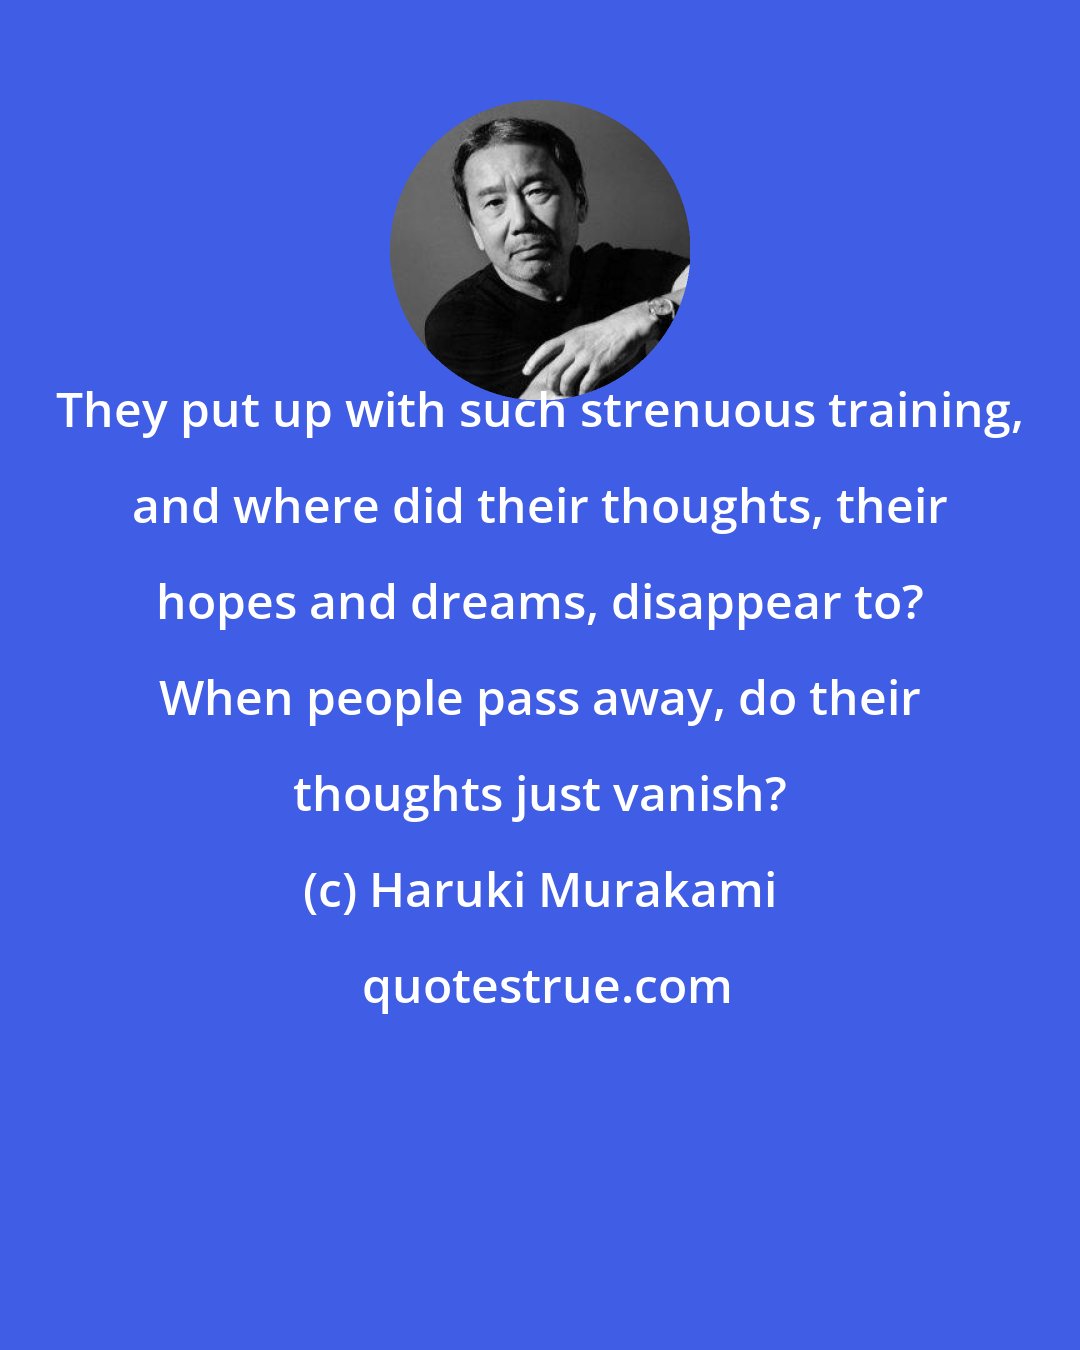 Haruki Murakami: They put up with such strenuous training, and where did their thoughts, their hopes and dreams, disappear to? When people pass away, do their thoughts just vanish?